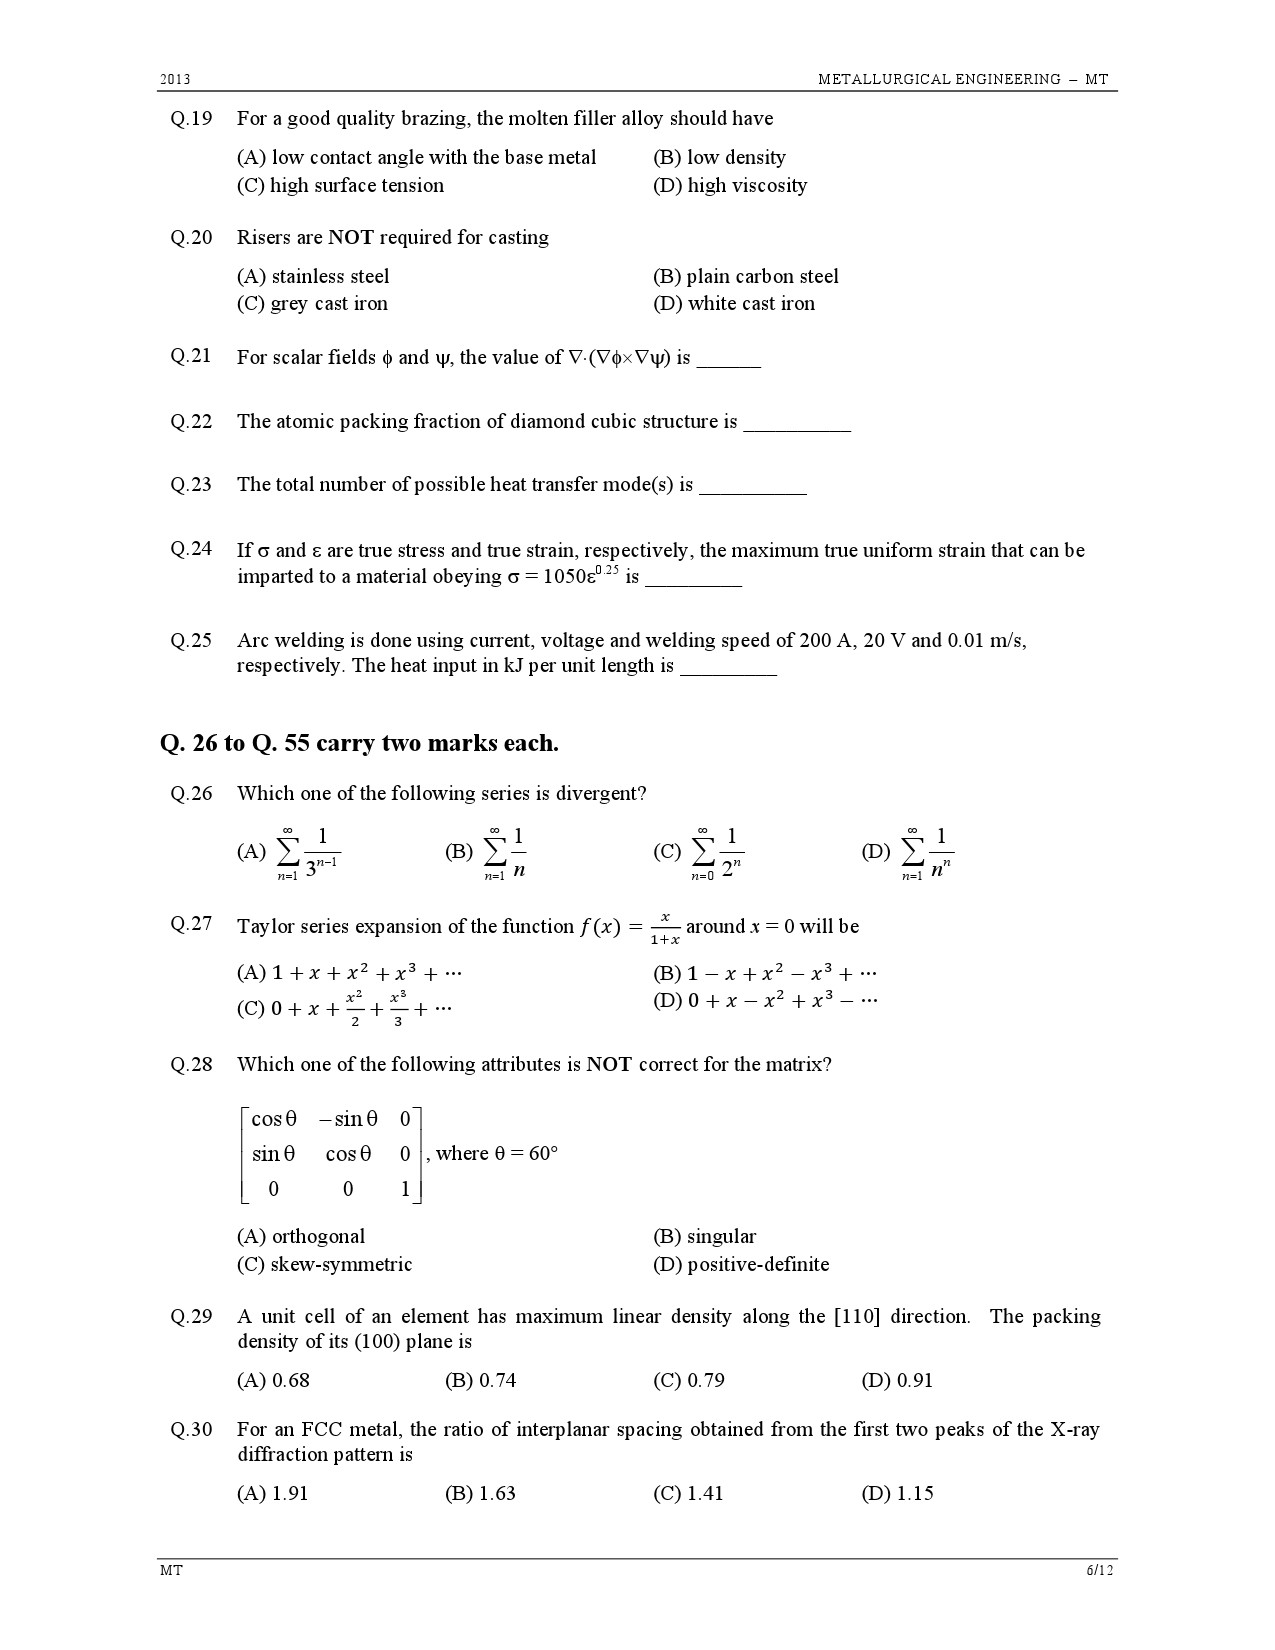 GATE Exam Question Paper 2013 Metallurgical Engineering 6